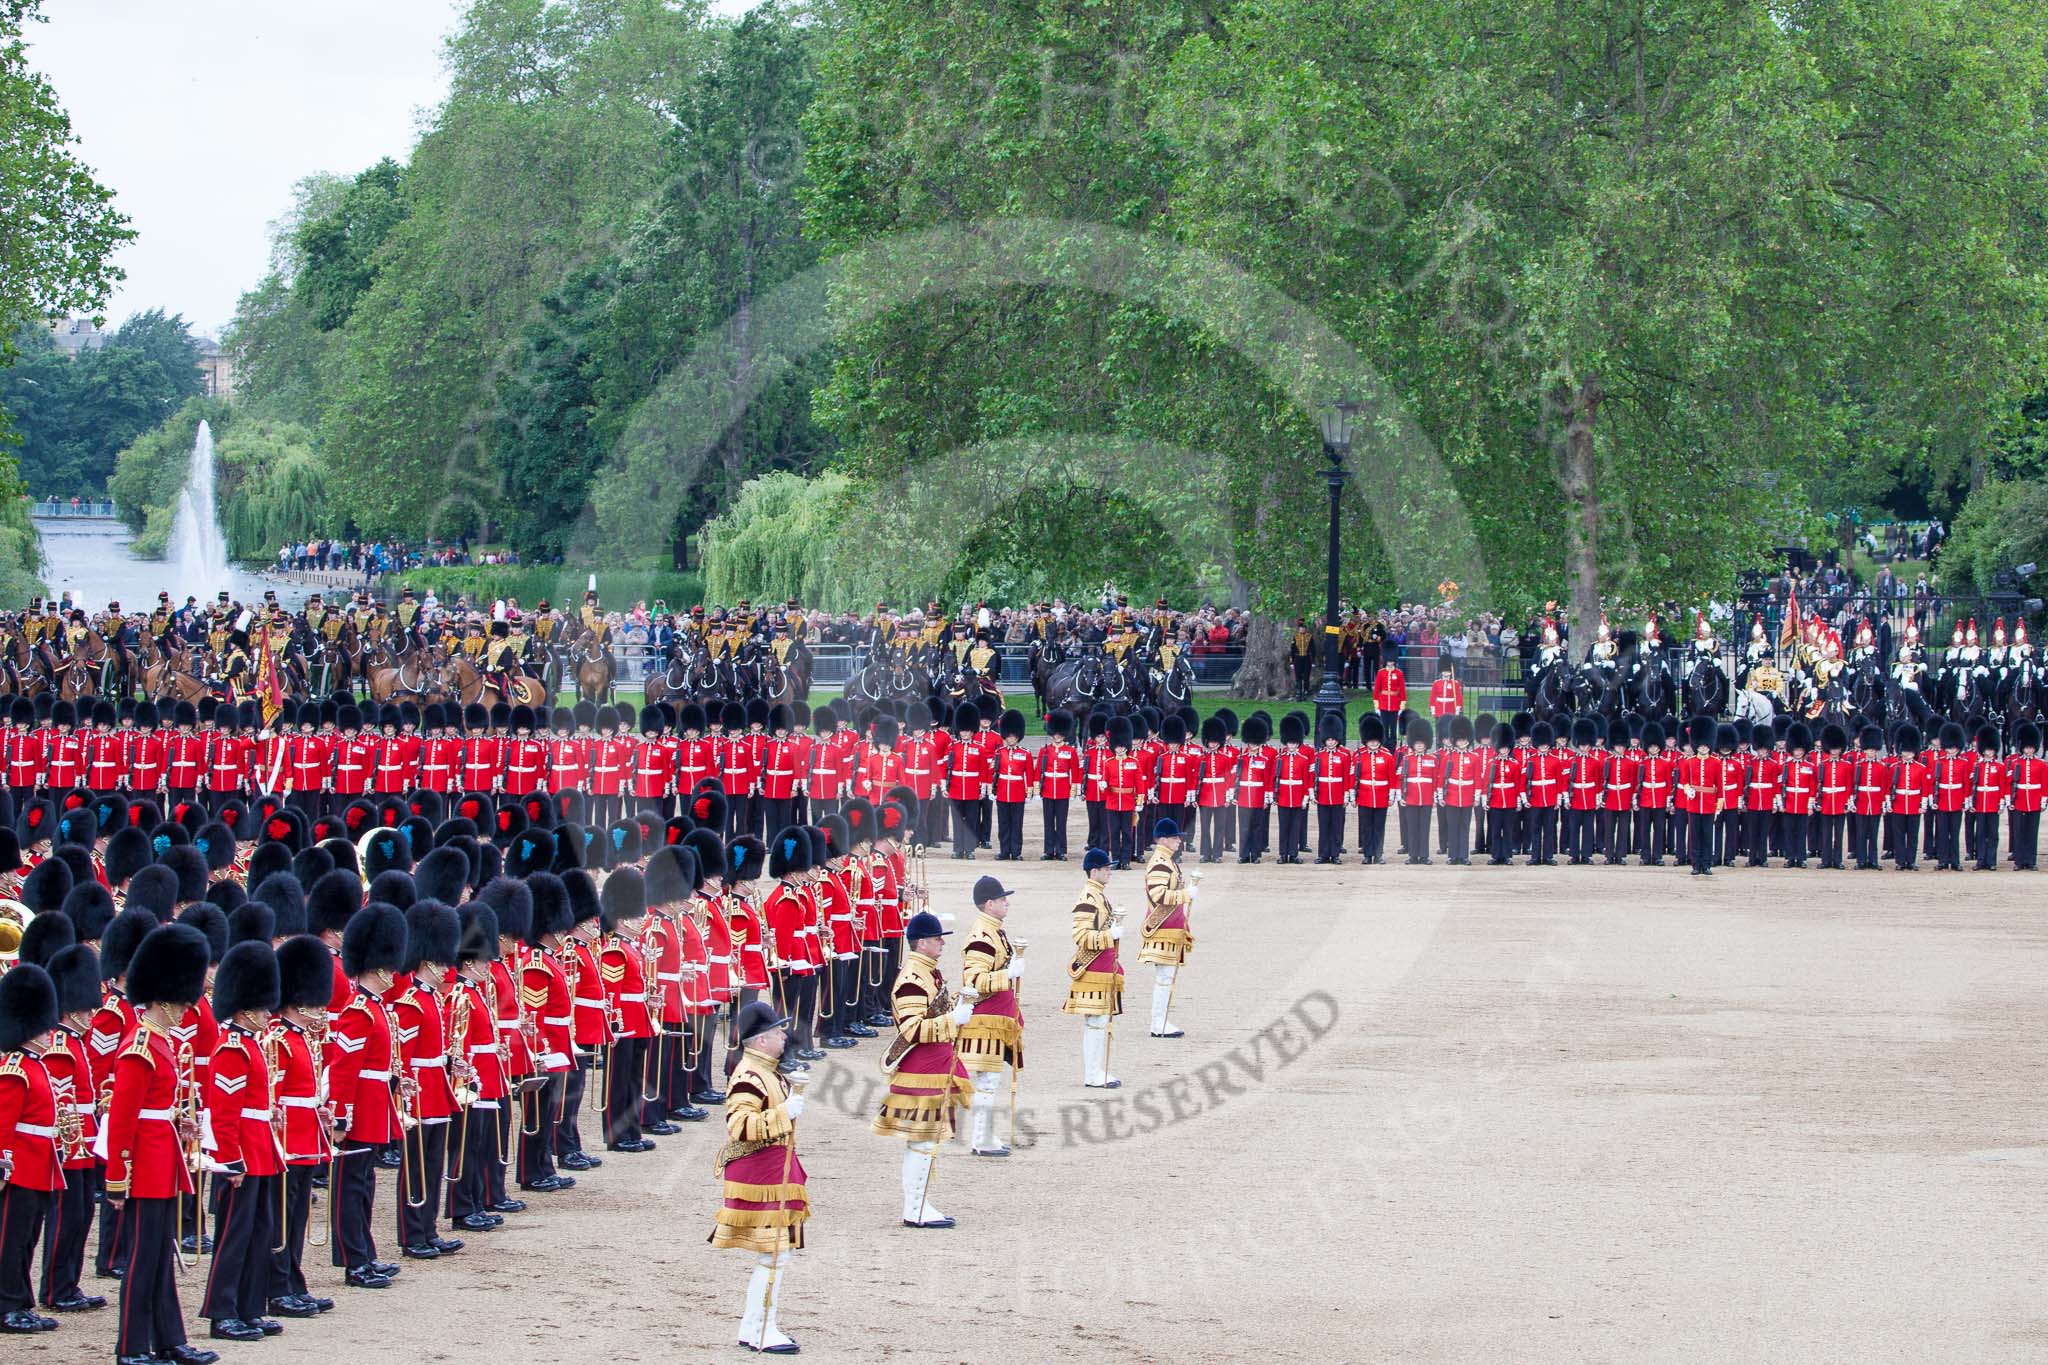 Trooping the Colour 2012: The Massed Bands have turned to the right, now they will march forward to give space for the Ride Past..
Horse Guards Parade, Westminster,
London SW1,

United Kingdom,
on 16 June 2012 at 11:52, image #525